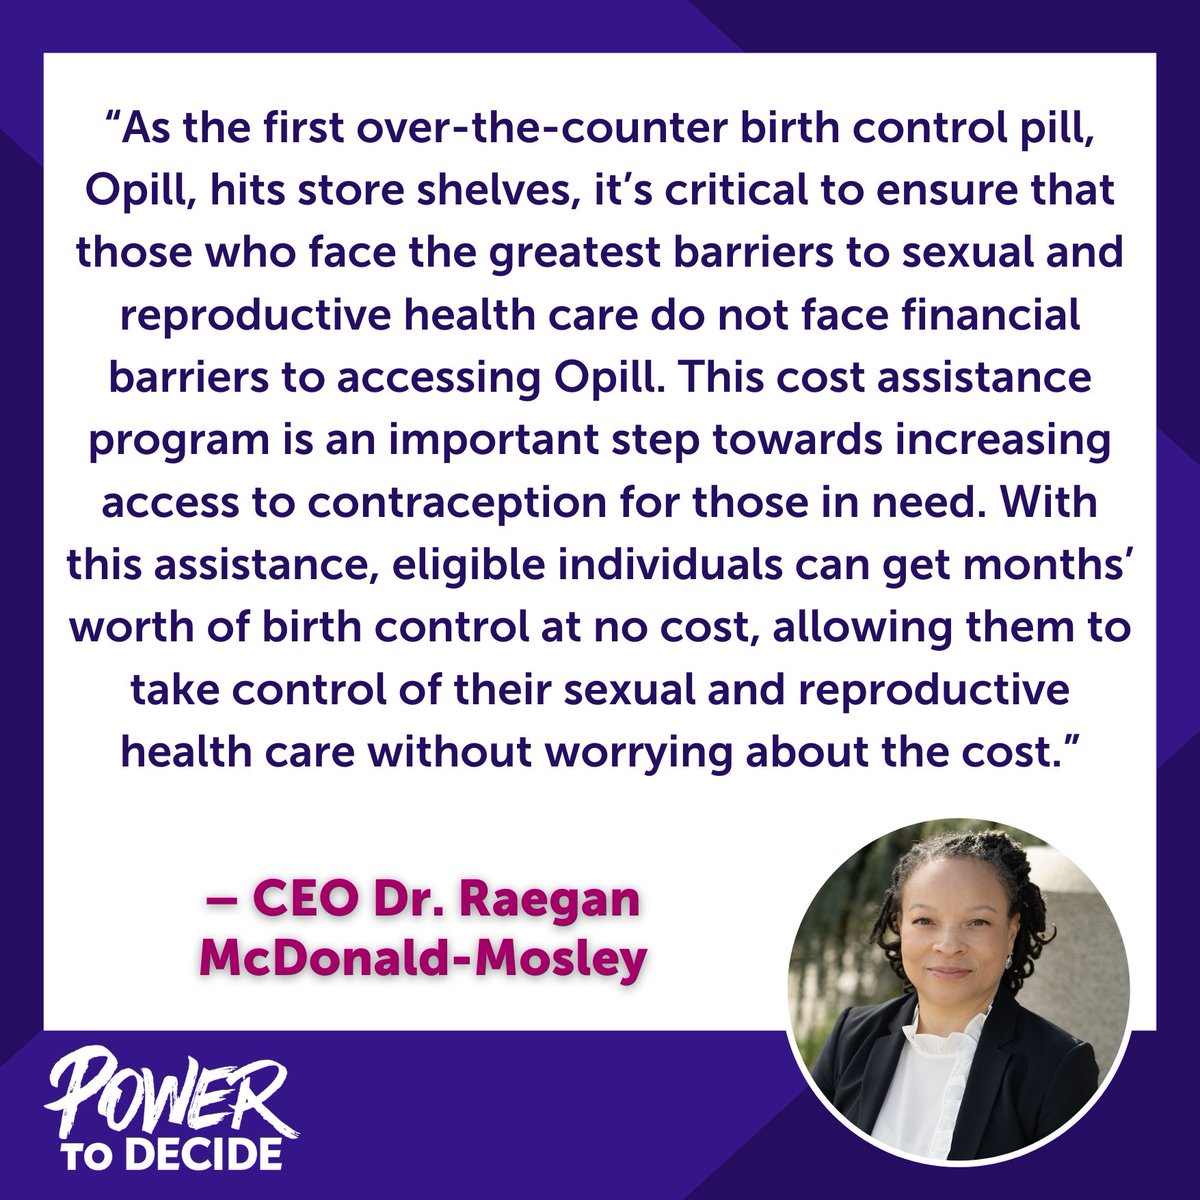 Today, Perrigo released a Cost Assistance Program for their OTC birth control pill, Opill. 🚨 Uninsured individuals living at or below 200% of the federal poverty level will be eligible for Opill at reduced or no cost. Statement from CEO @DrRaegan: powertodecide.org/news/power-dec…